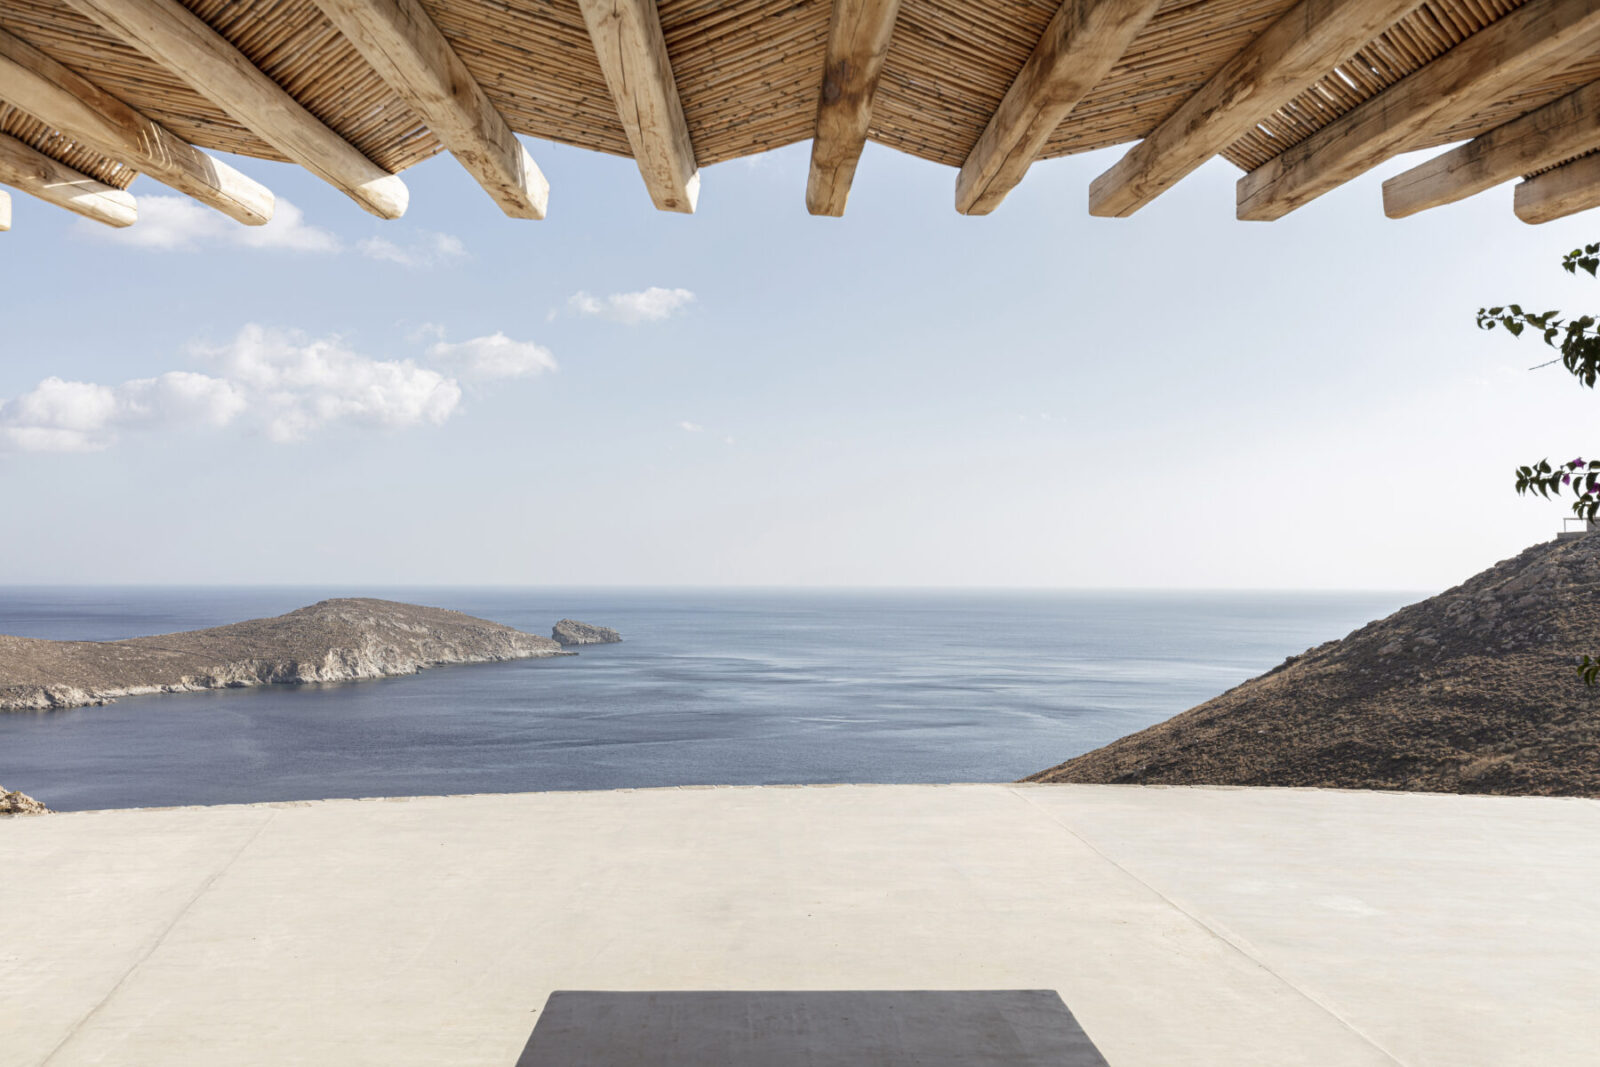 Archisearch Xerolithi summer house in Serifos, Cyclades, Greece | Sinas Architects